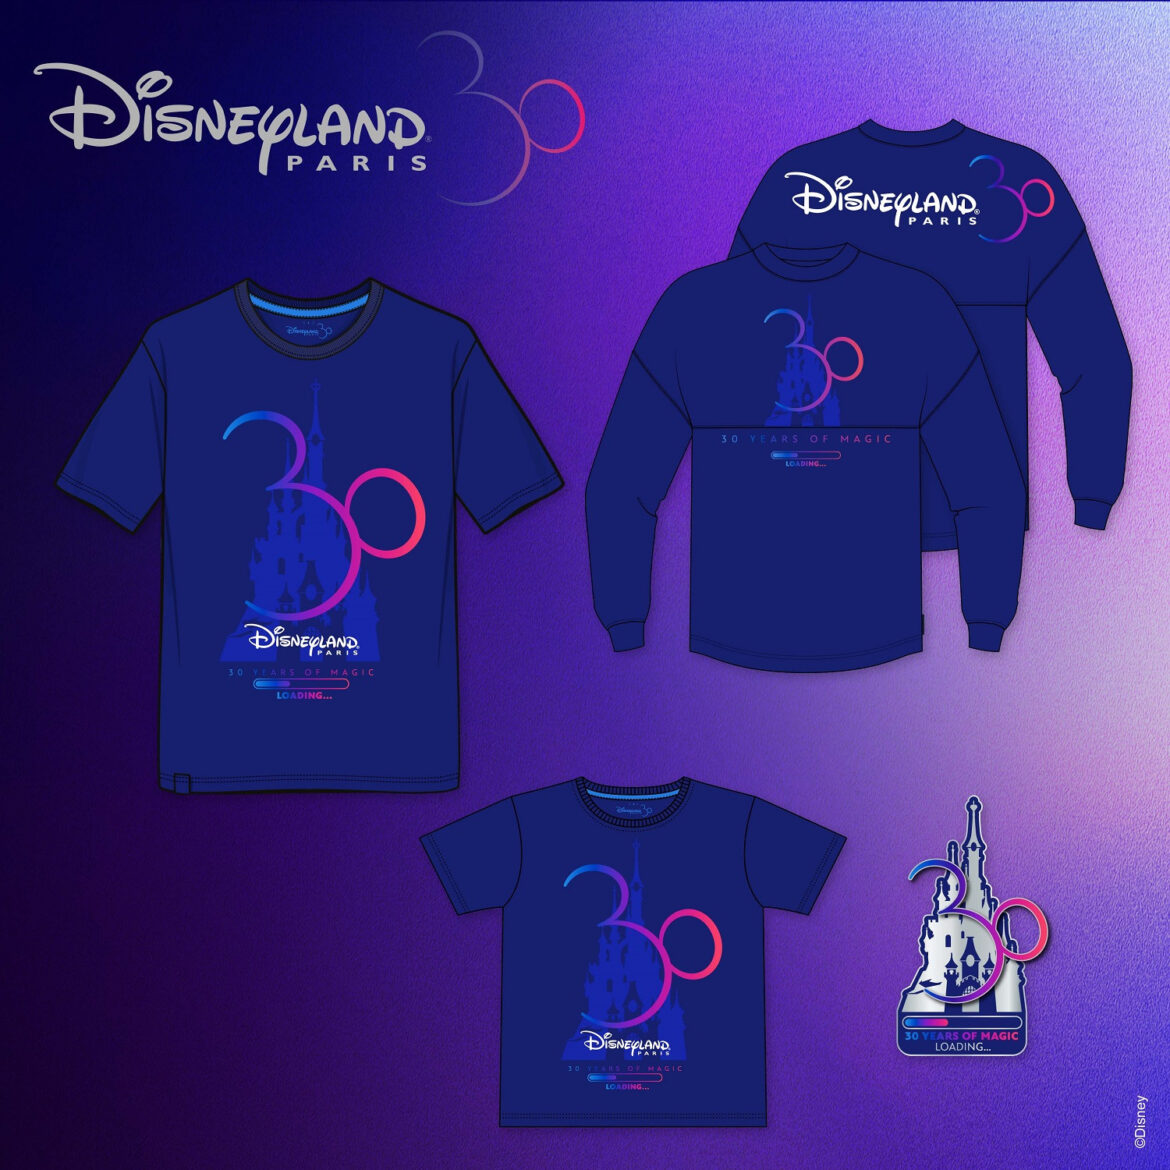 First look at New Merchandise Coming to Disneyland Paris